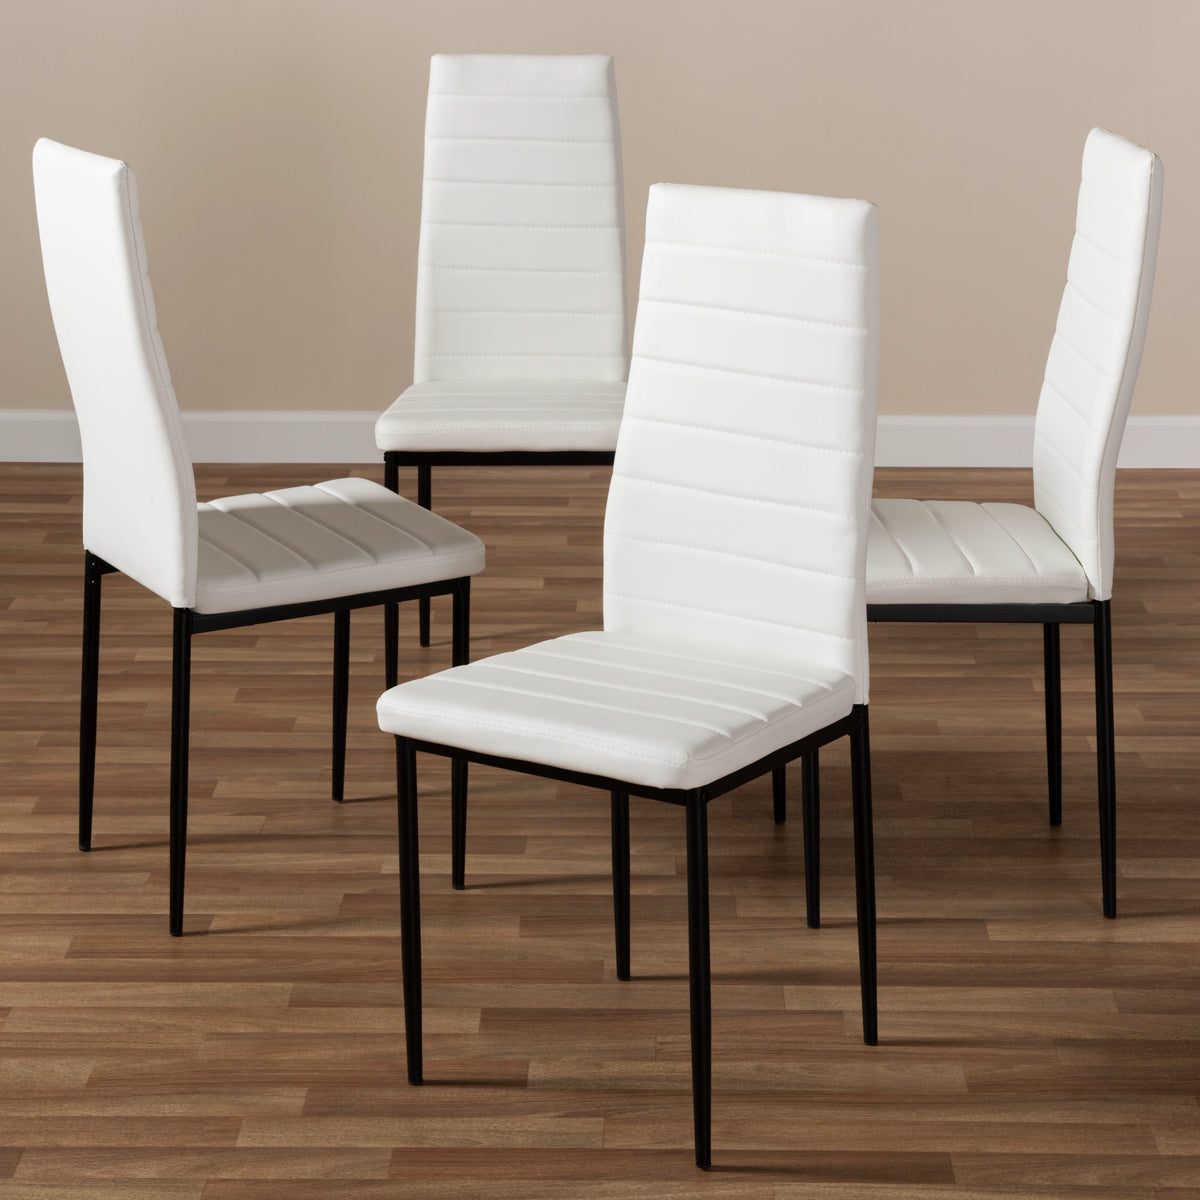 Baxton Studio Armand Modern and Contemporary White Faux Leather Upholstered Dining Chair (Set of 4) Baxton Studio-dining chair-Minimal And Modern - 4